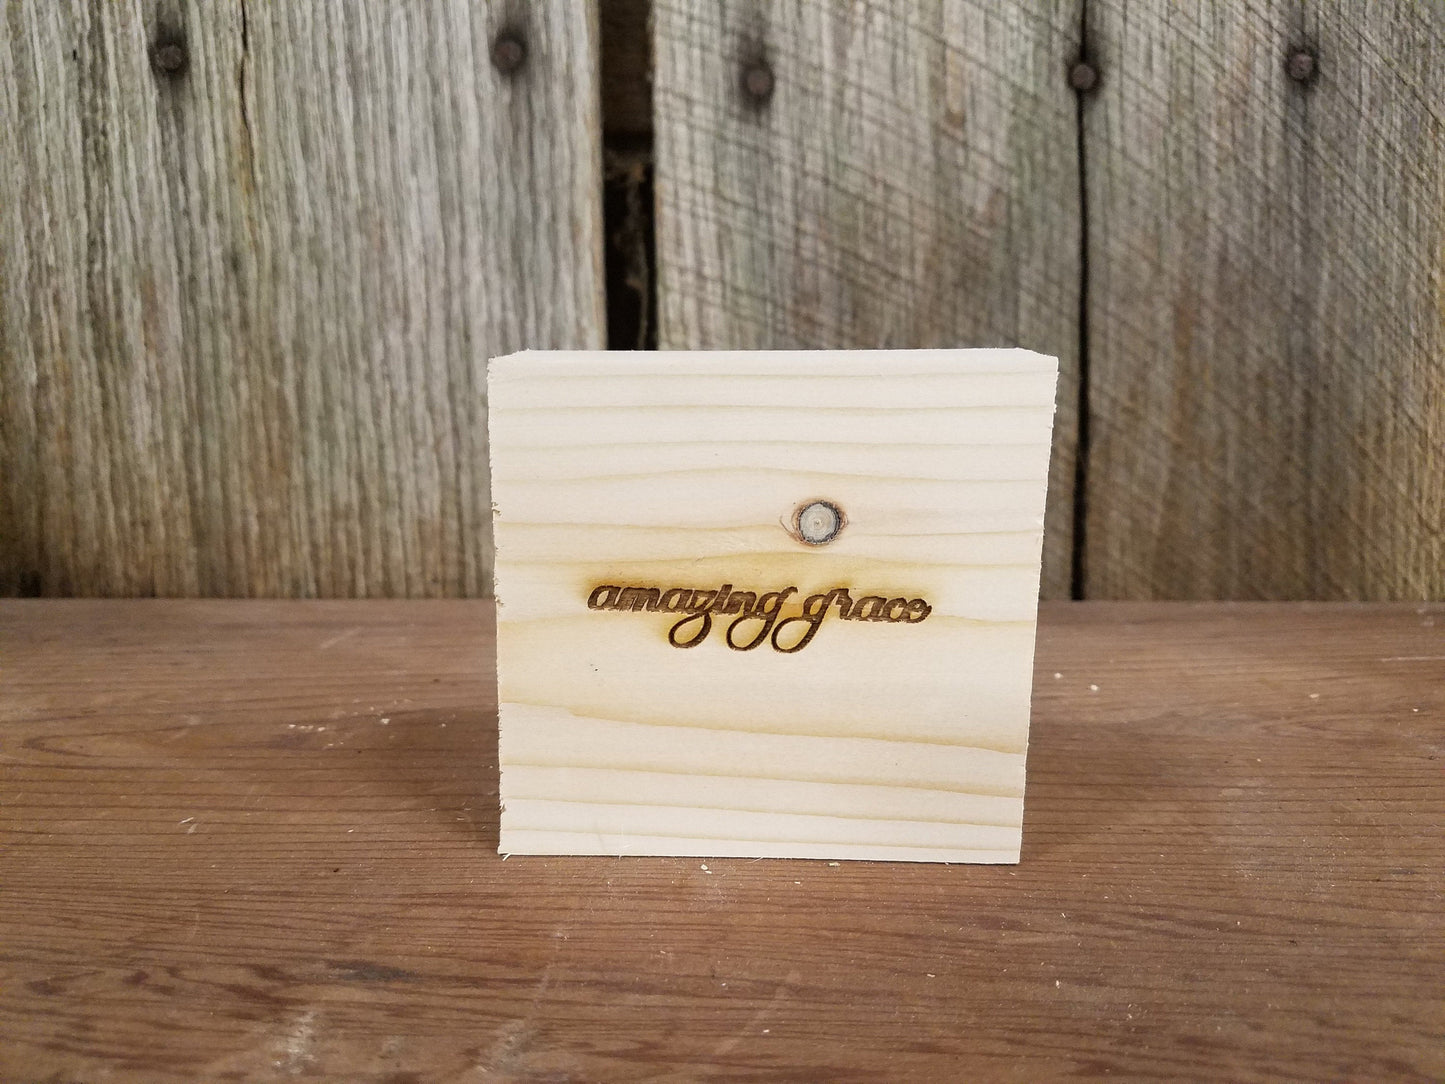 Amazing Grace, Encouragement, Hope, Decor, Rustic, Pine, Self Sitter, Handmade, Wood, Laser Engraved, Primitive, Small Accent, Gift